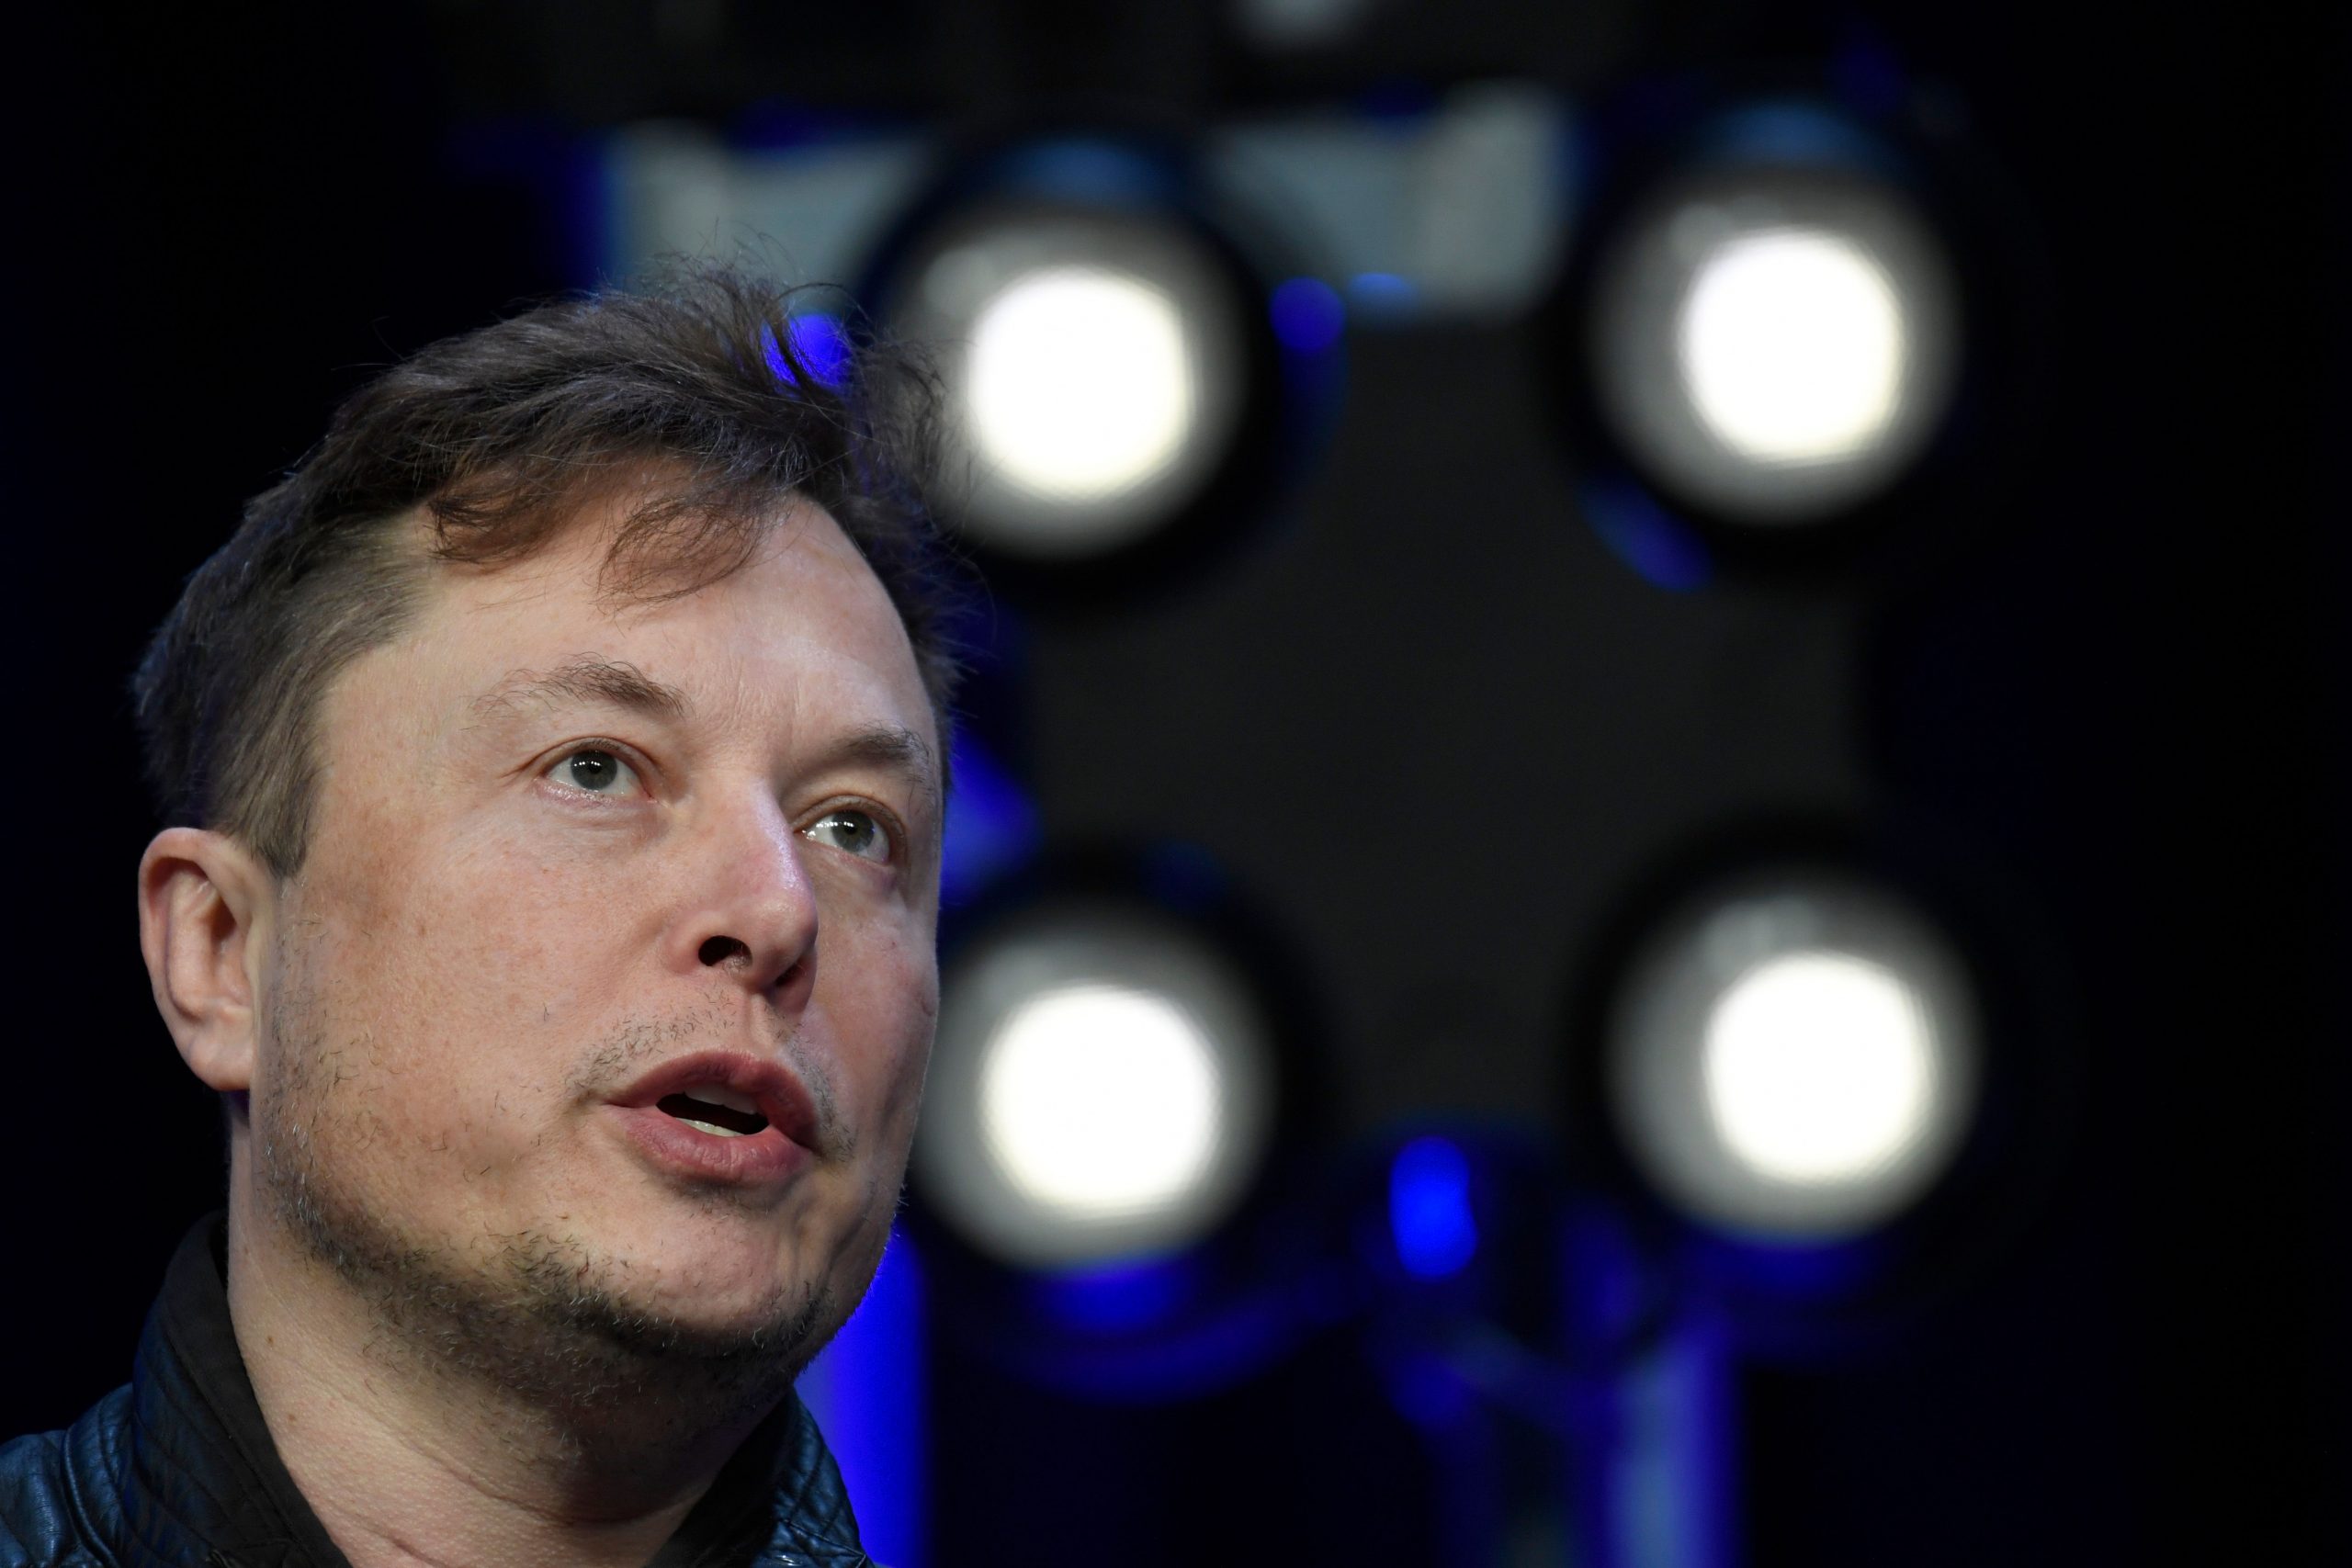 Twitter sues Elon Musk to force him to complete $44 billion purchase